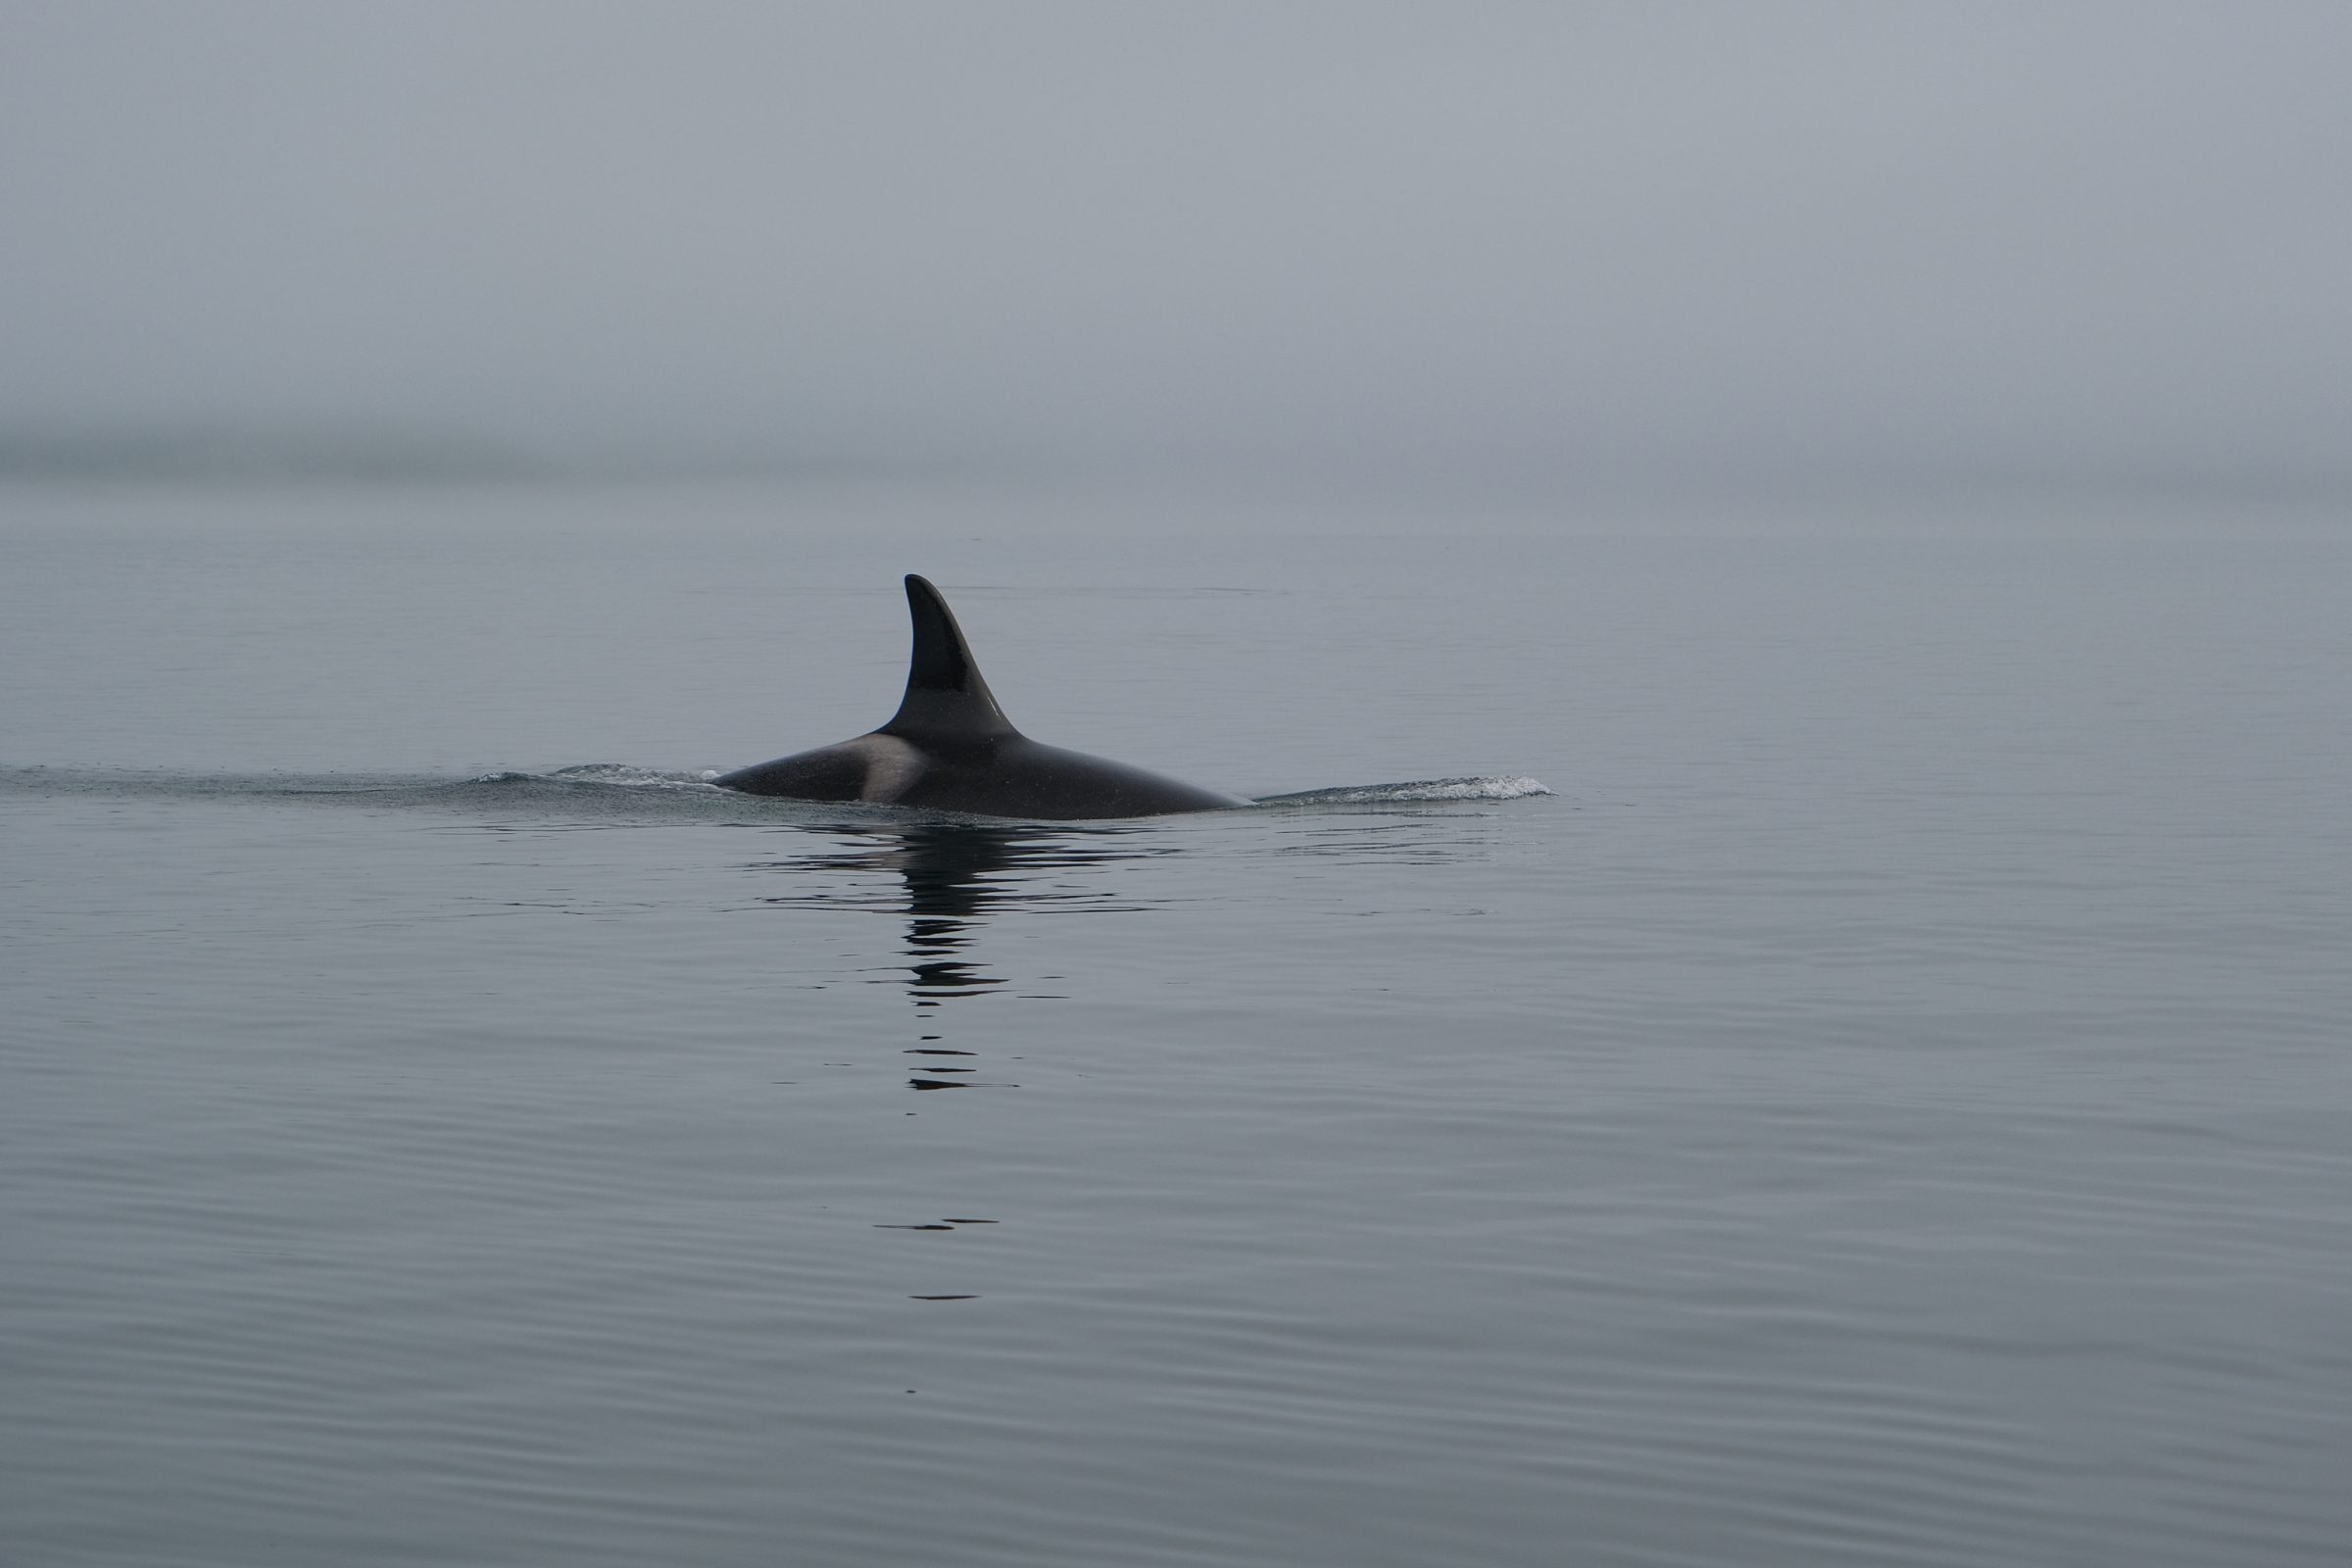 One of the many Orca we saw during our whale watching tour in Telegraph Cove